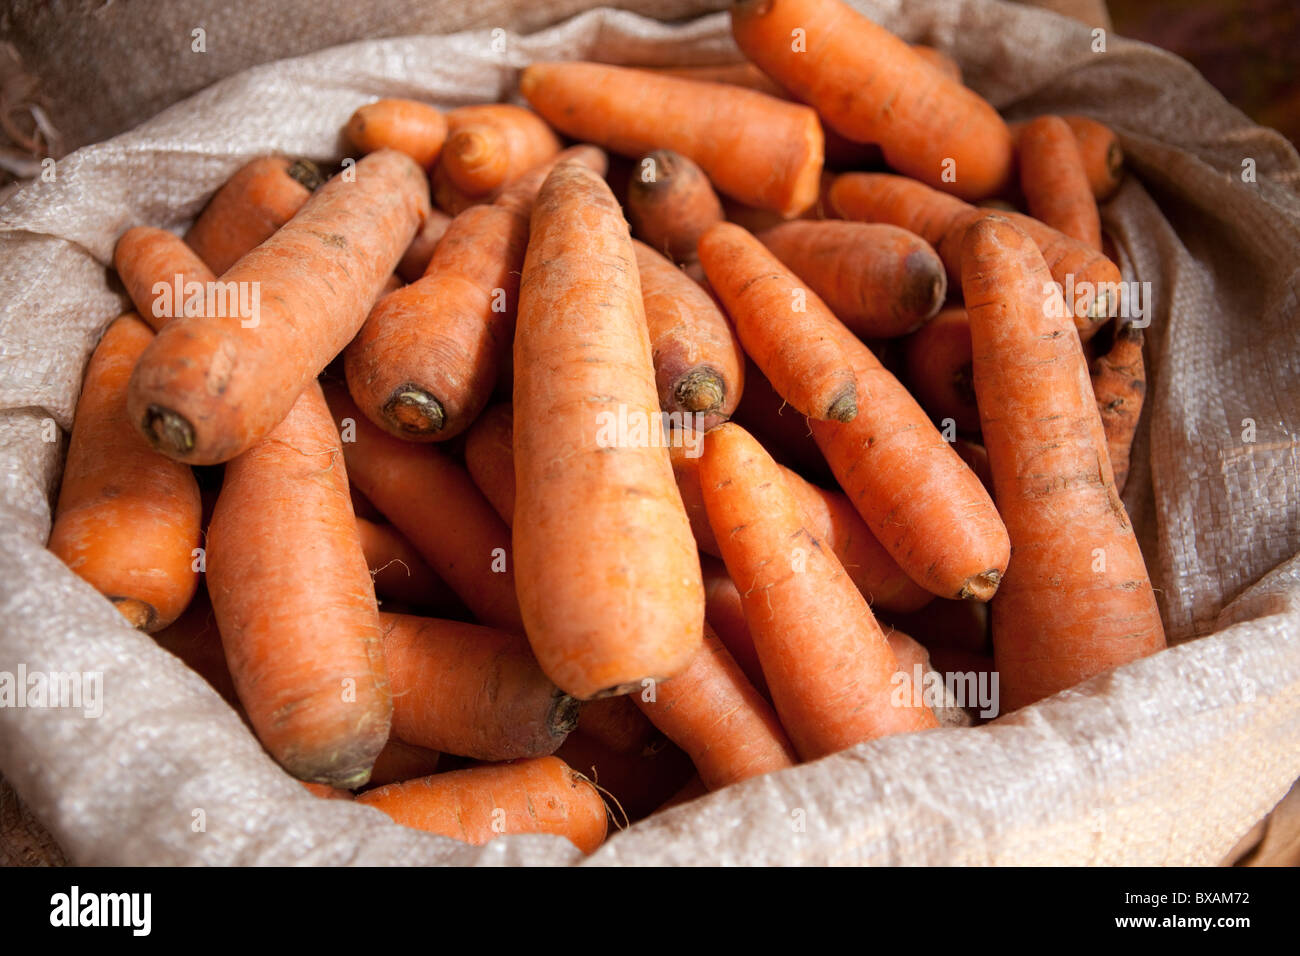 Carrots are for sale in Iganga's central market - Iganga, Uganda, East Africa. Stock Photo